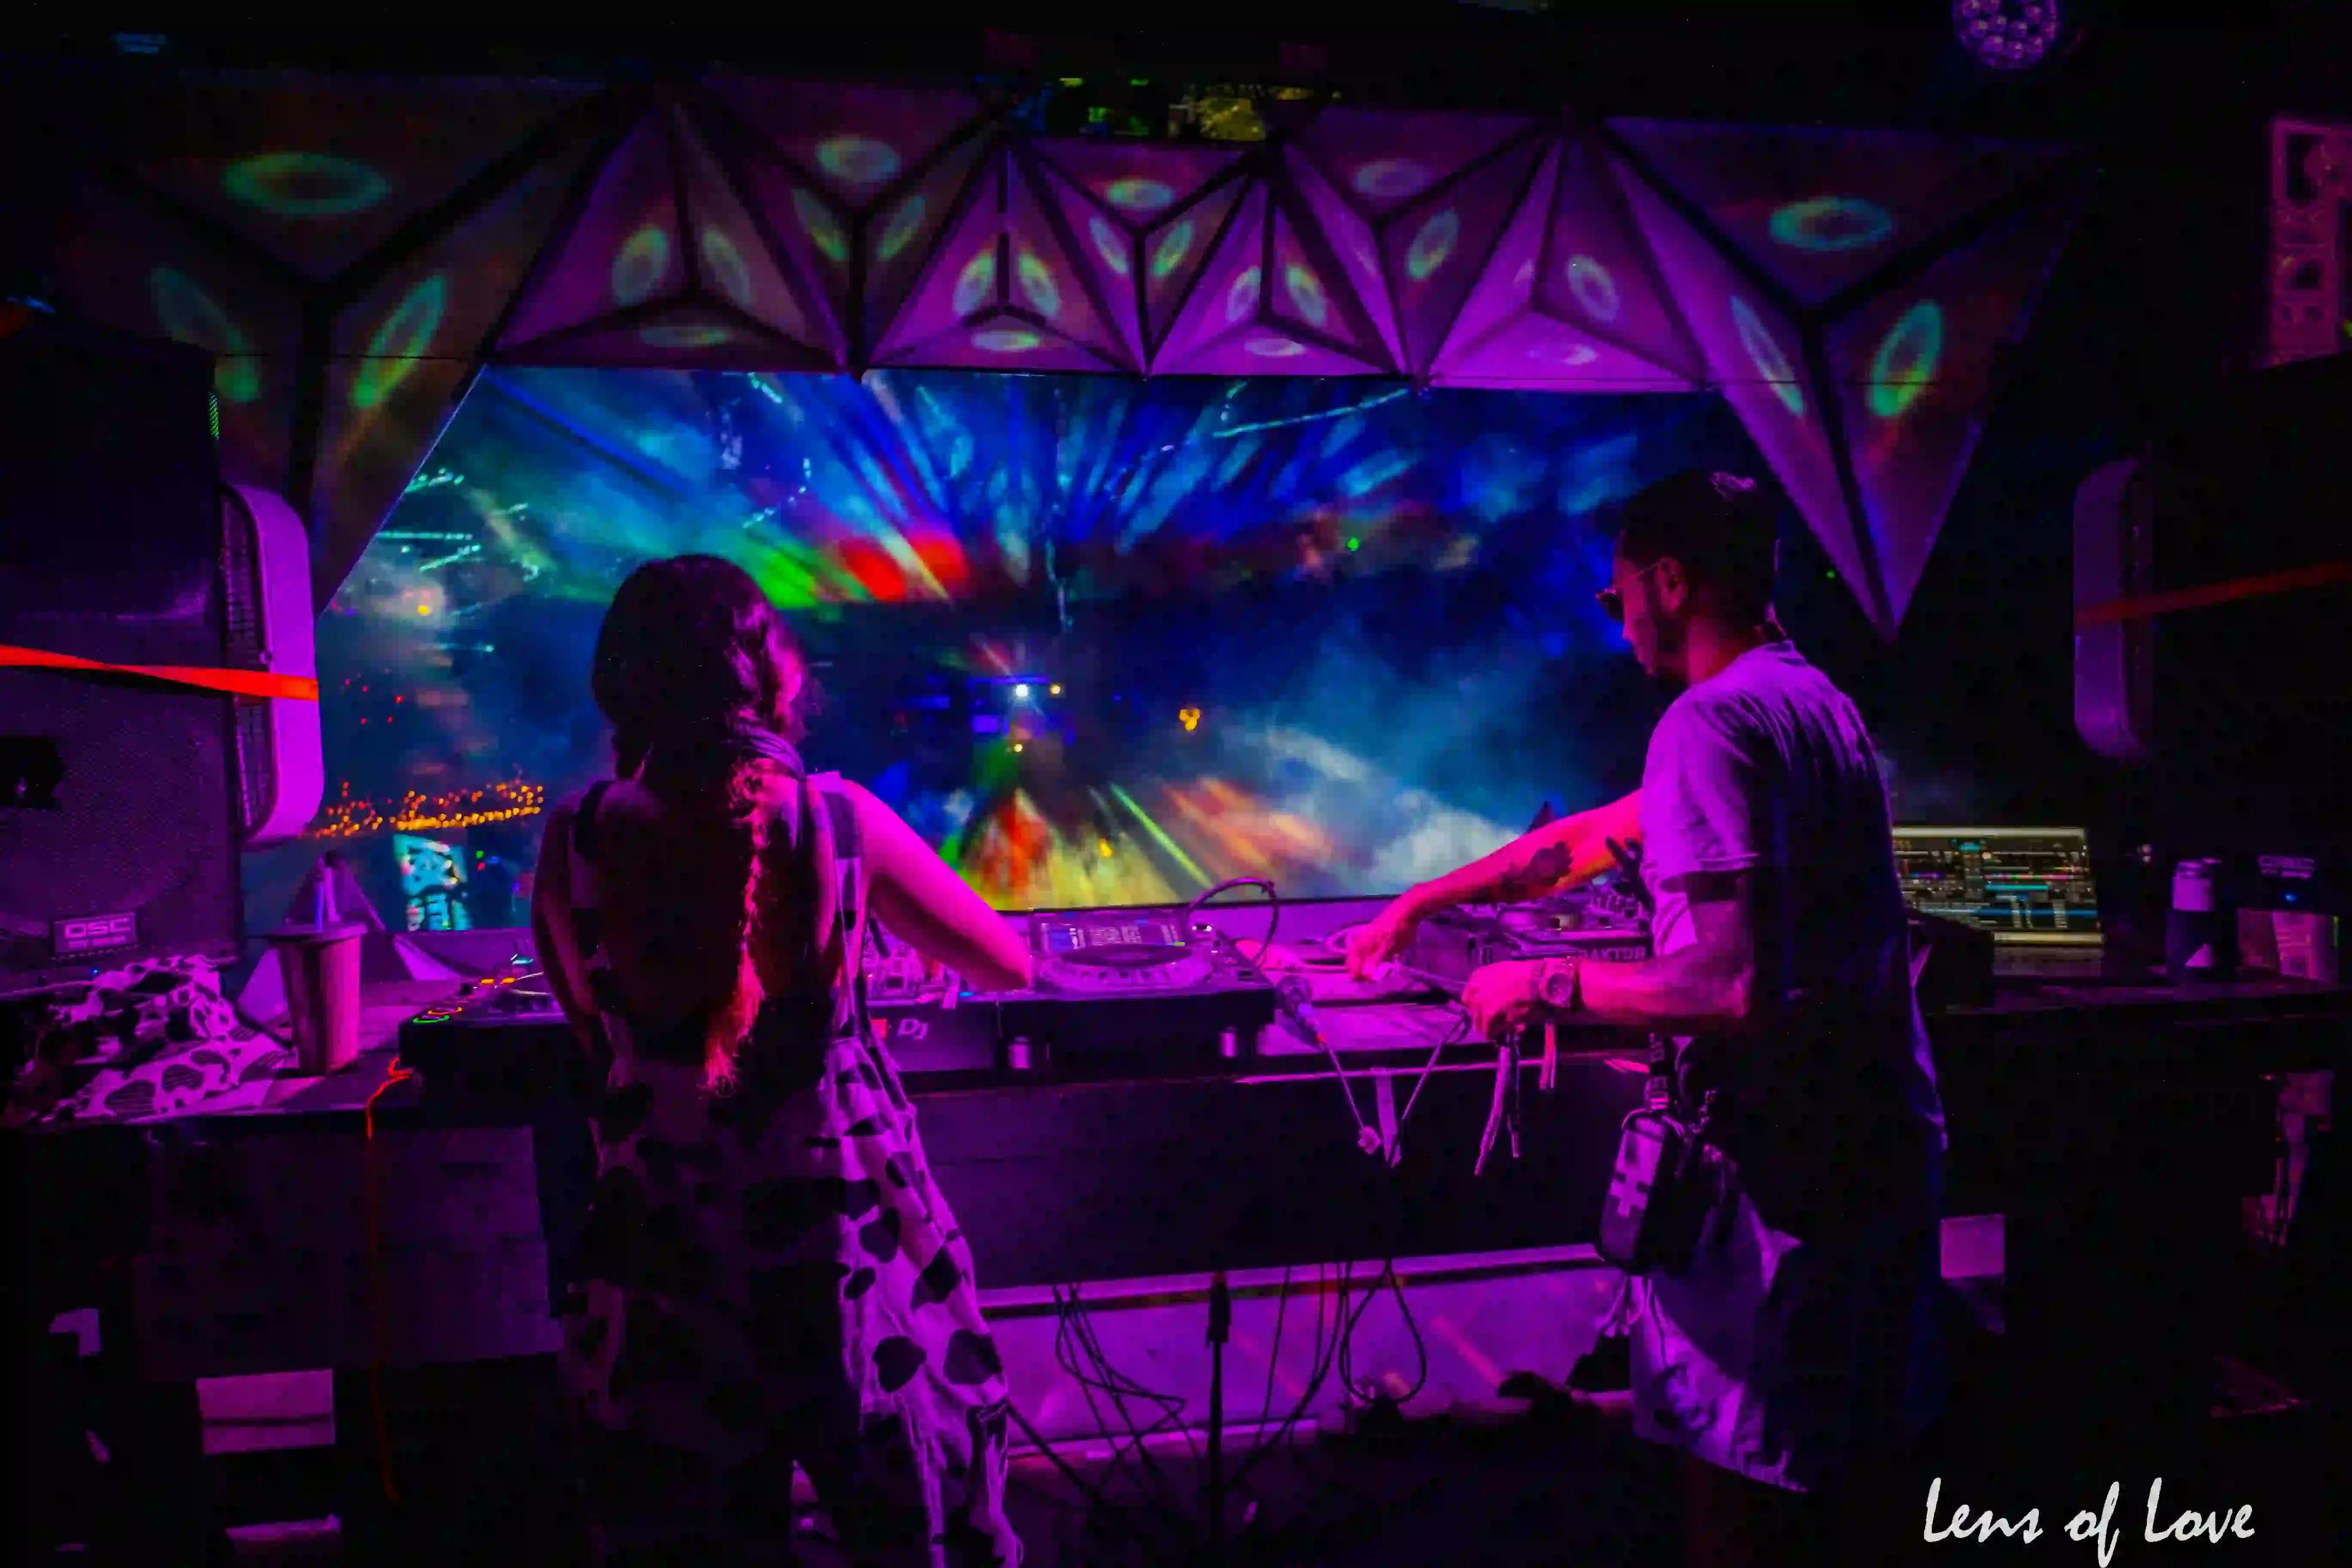 DJs at a neon-lit console with a vibrant visual display at a nighttime event.